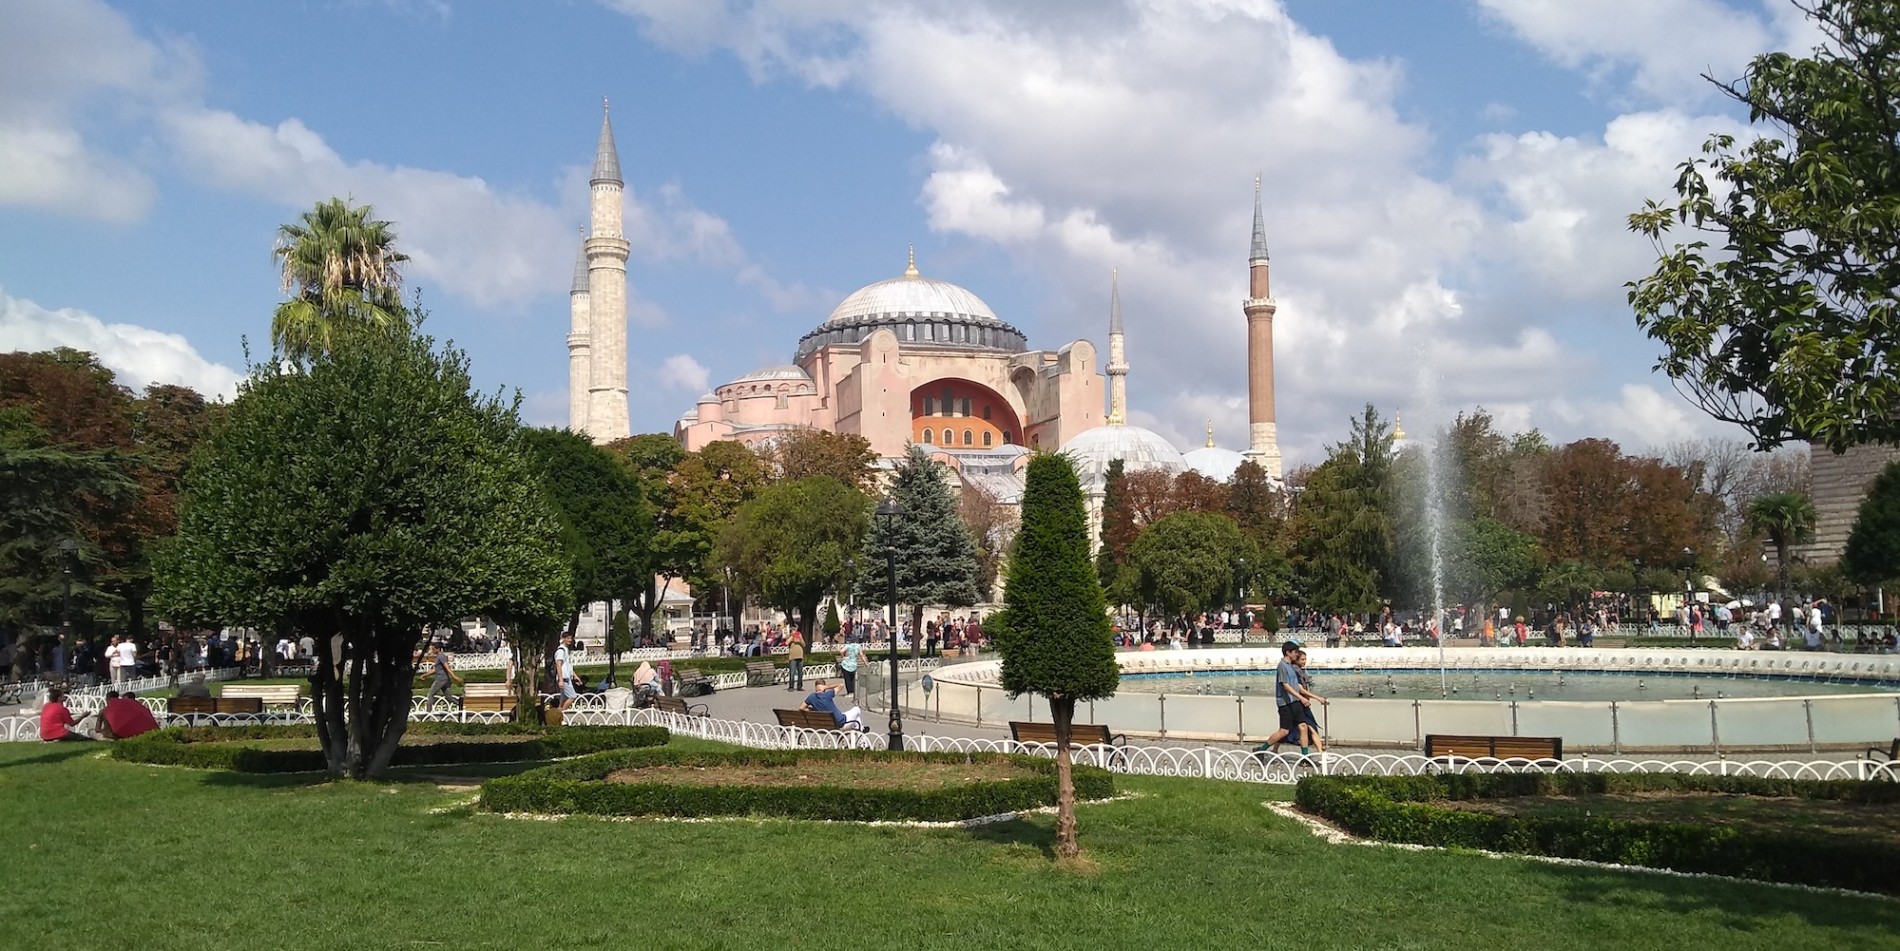 View if Hagia Sophia and surrounding park and fountain with people walking around on a sunny day in Turkey